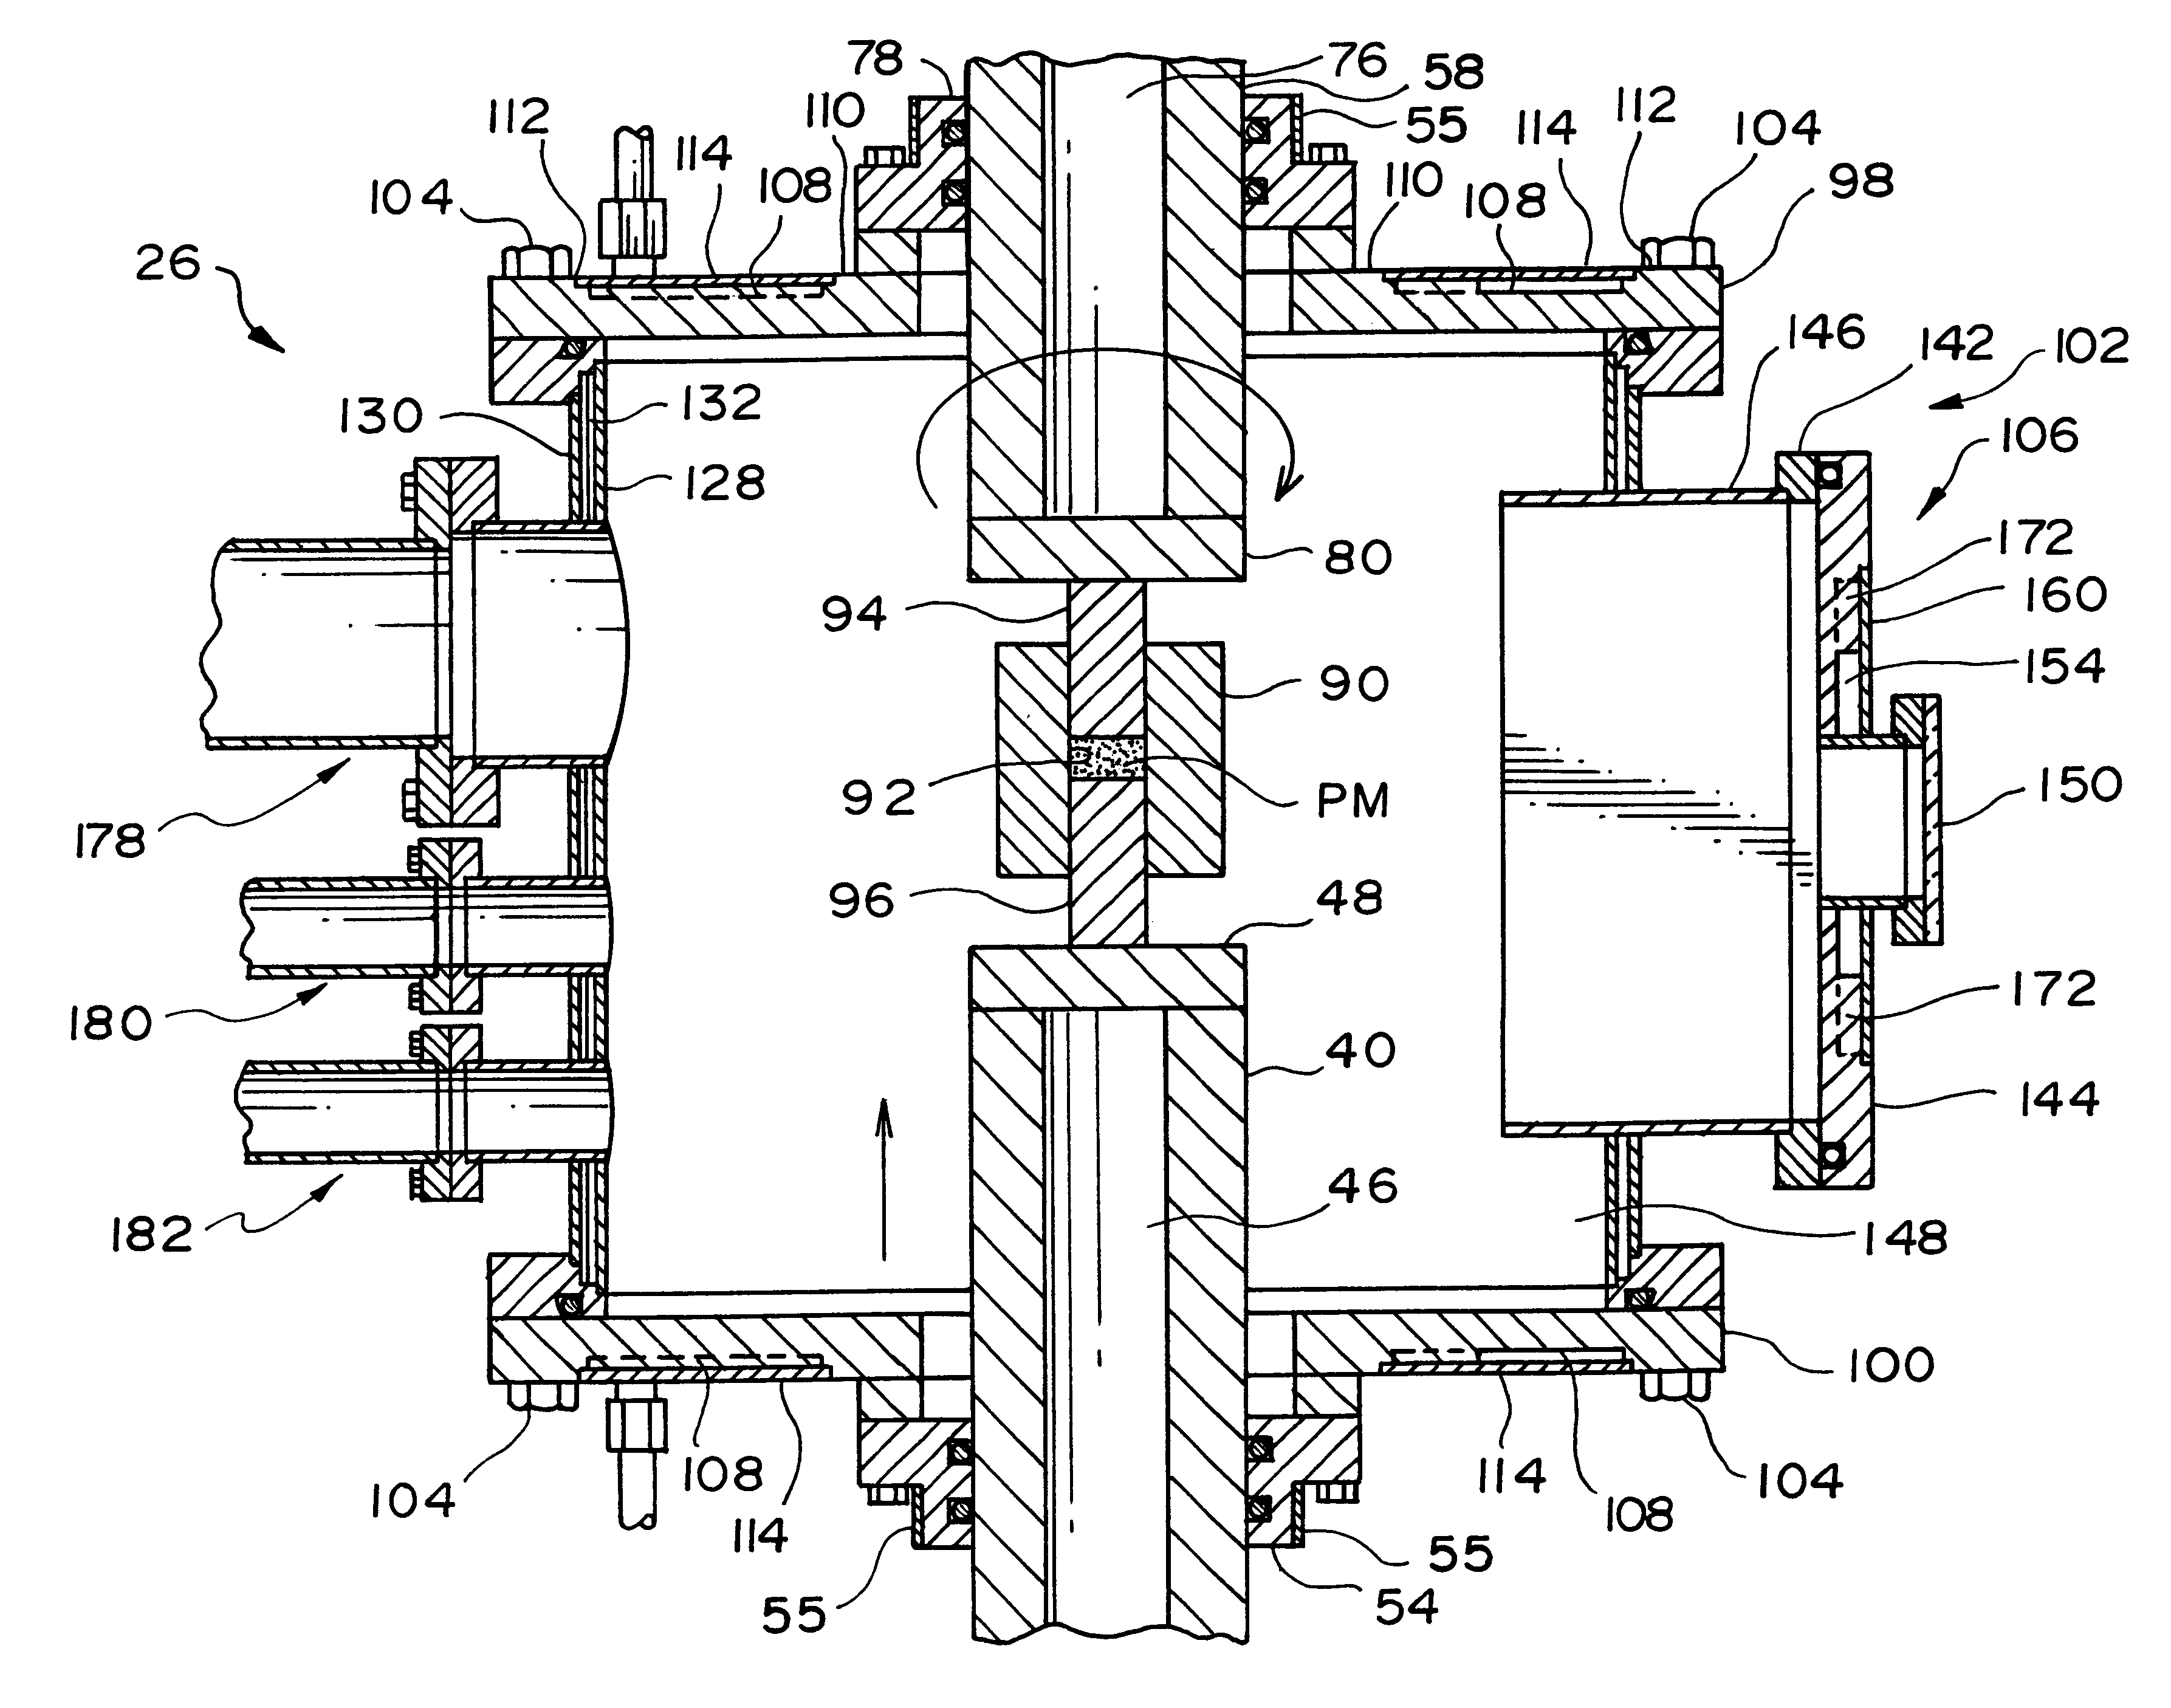 Apparatus for bonding a particle material to near theoretical density